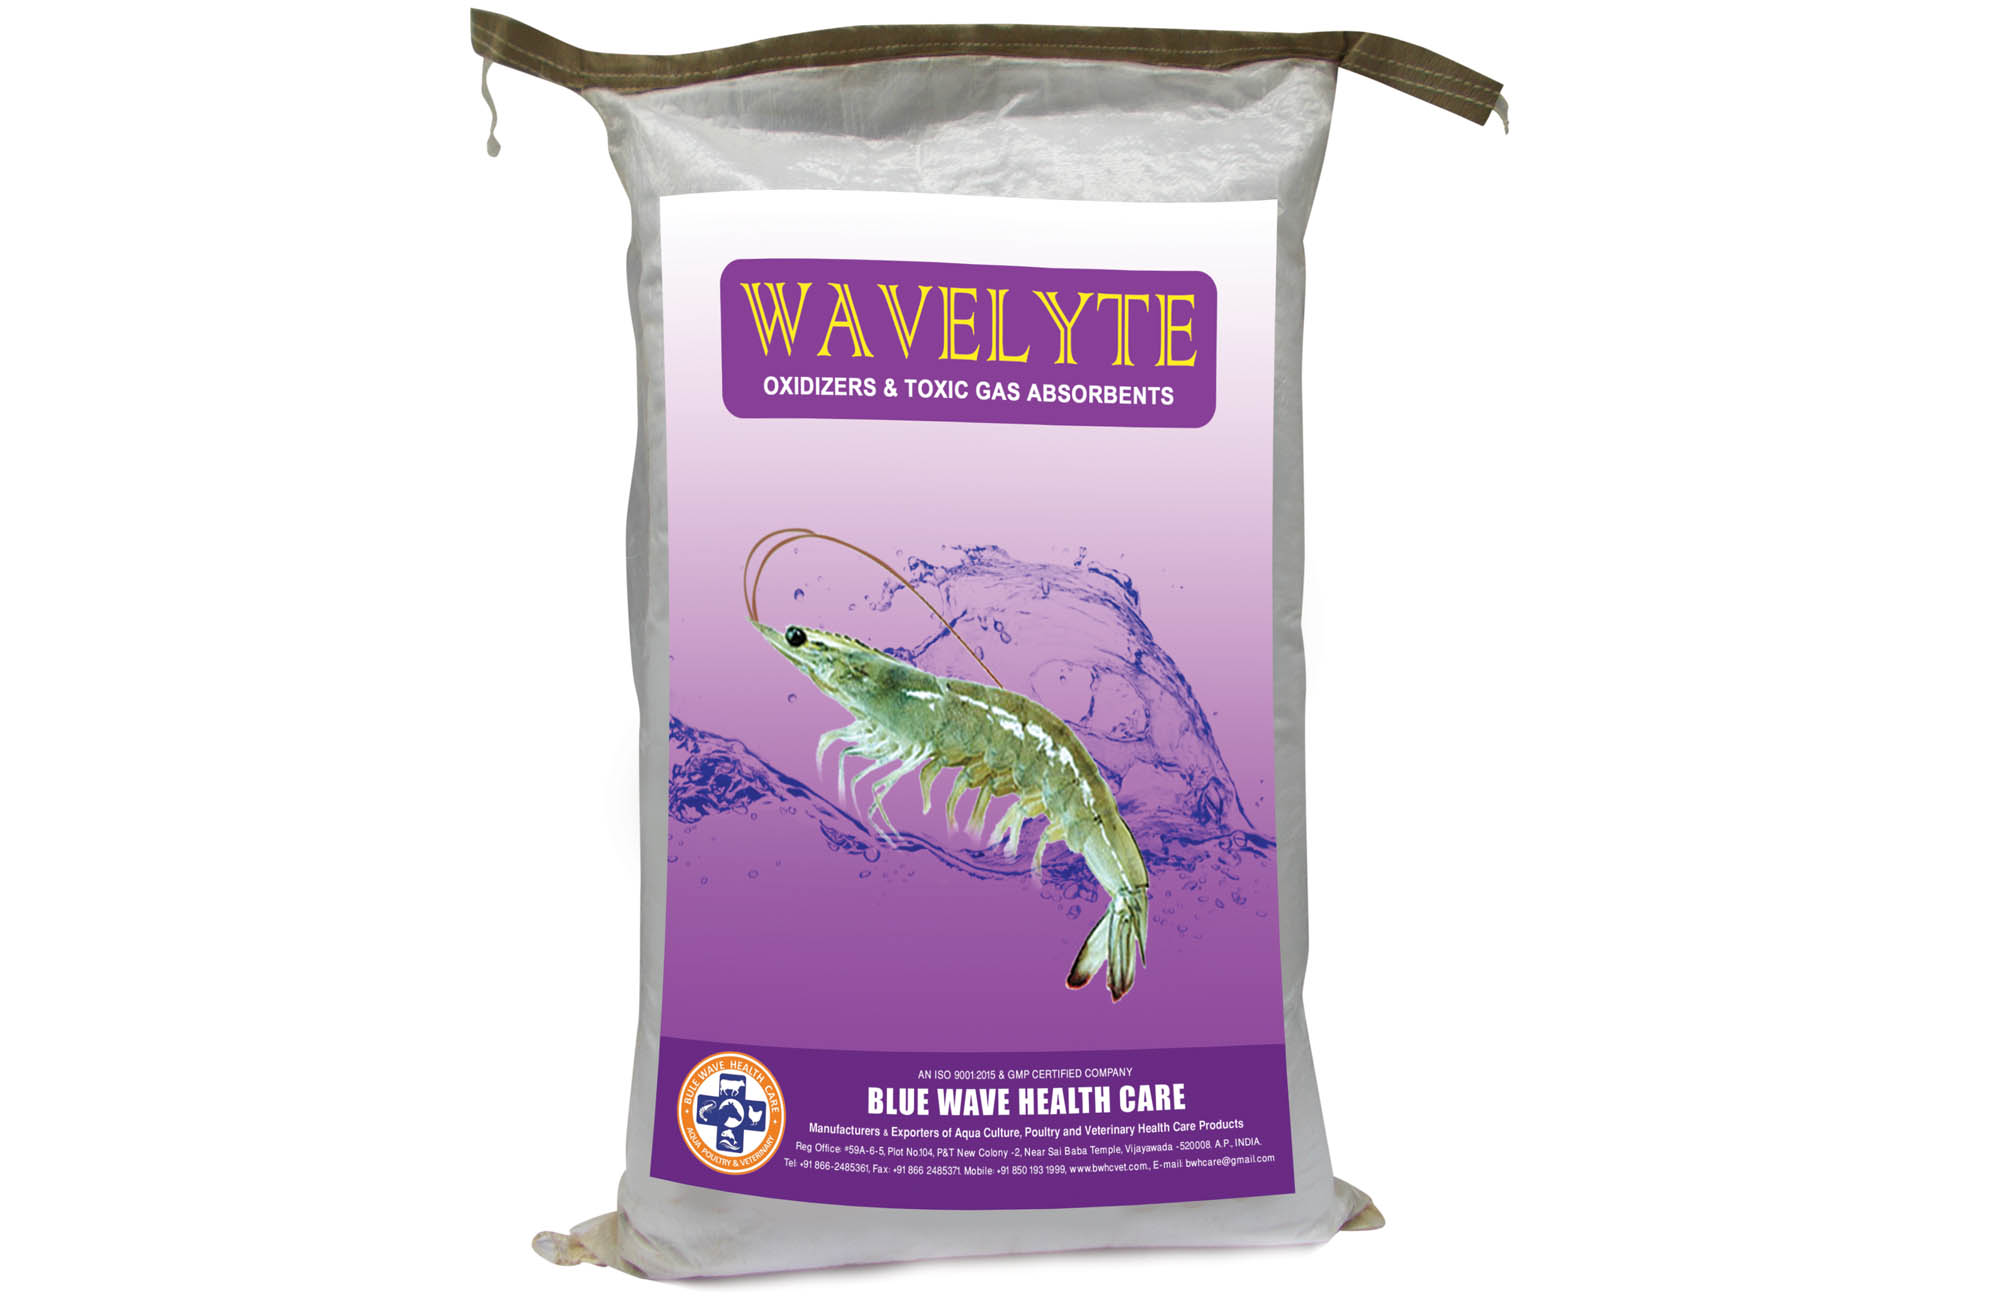 WAVELYTE ( Oxidizers & Toxic Gas Absorbents)